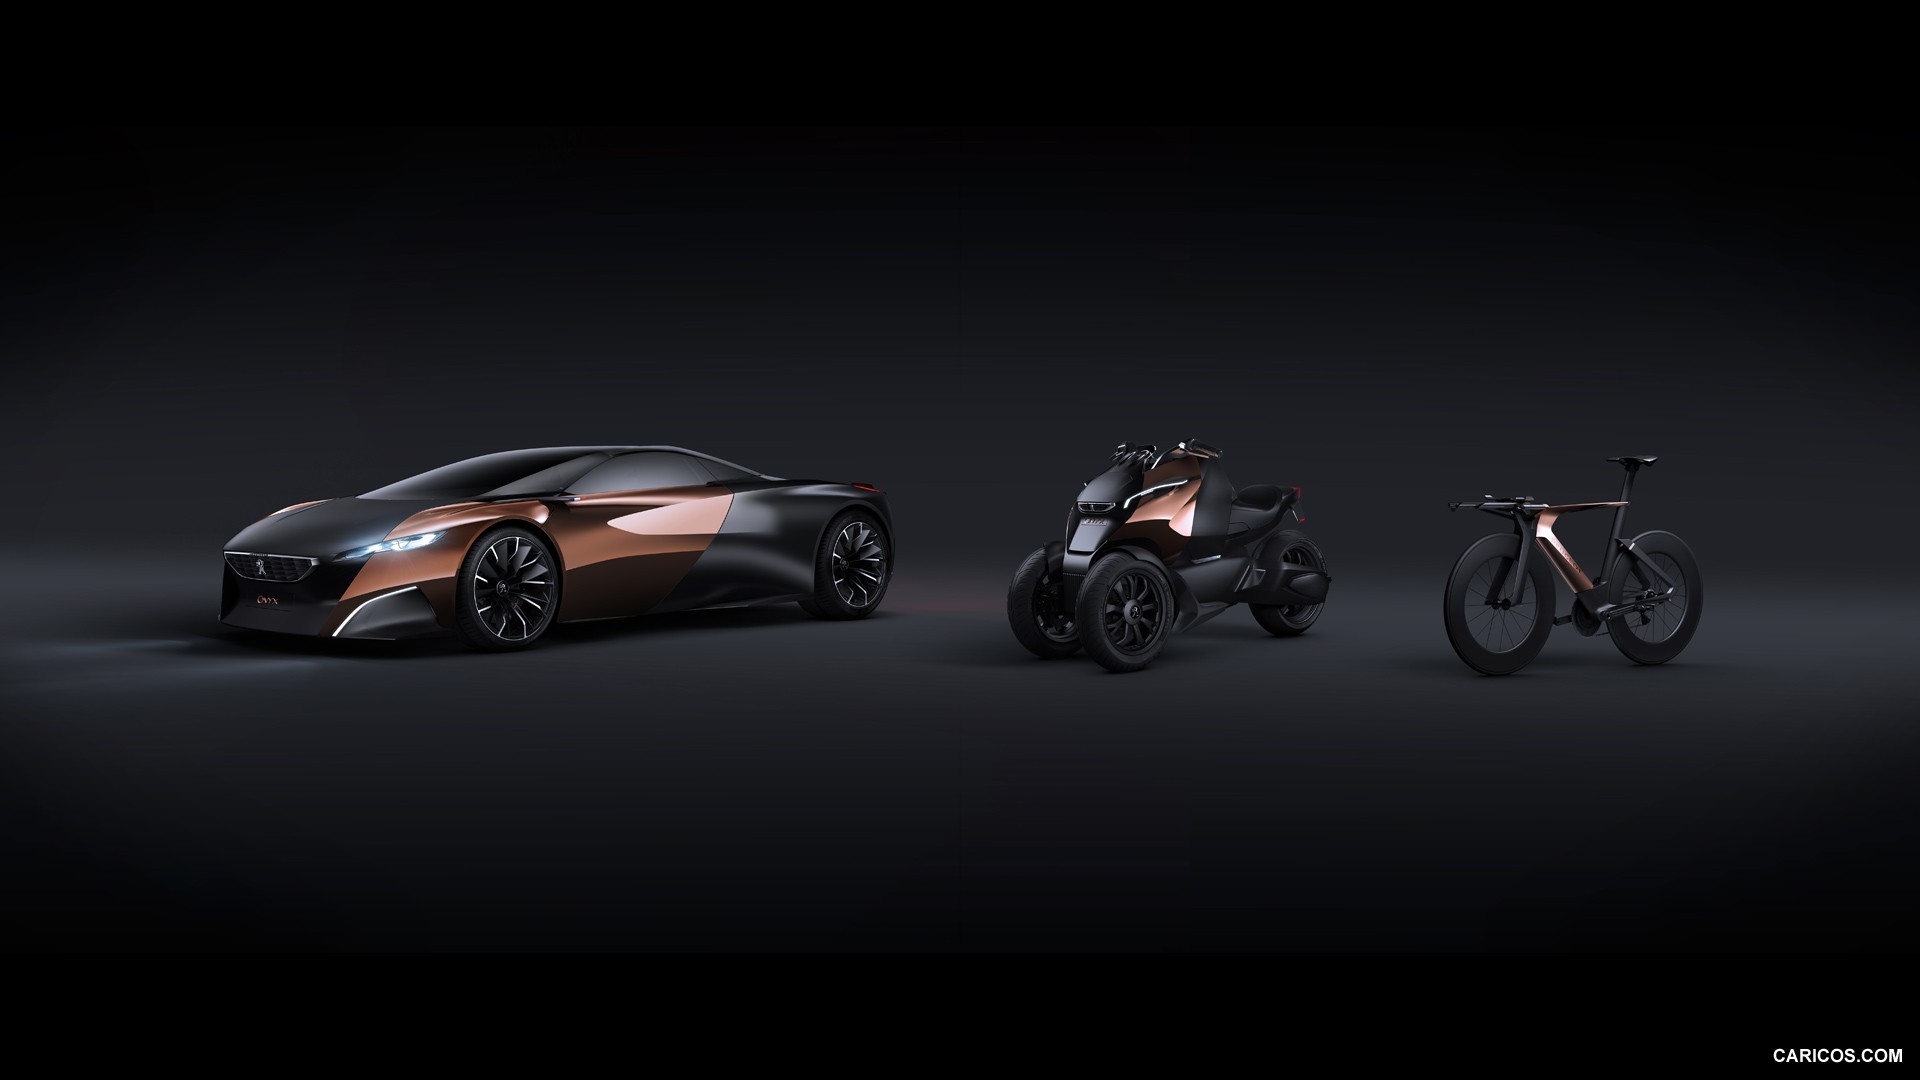 General 1920x1080 car Peugeot vehicle quad bicycle simple background French Cars Stellantis concept cars